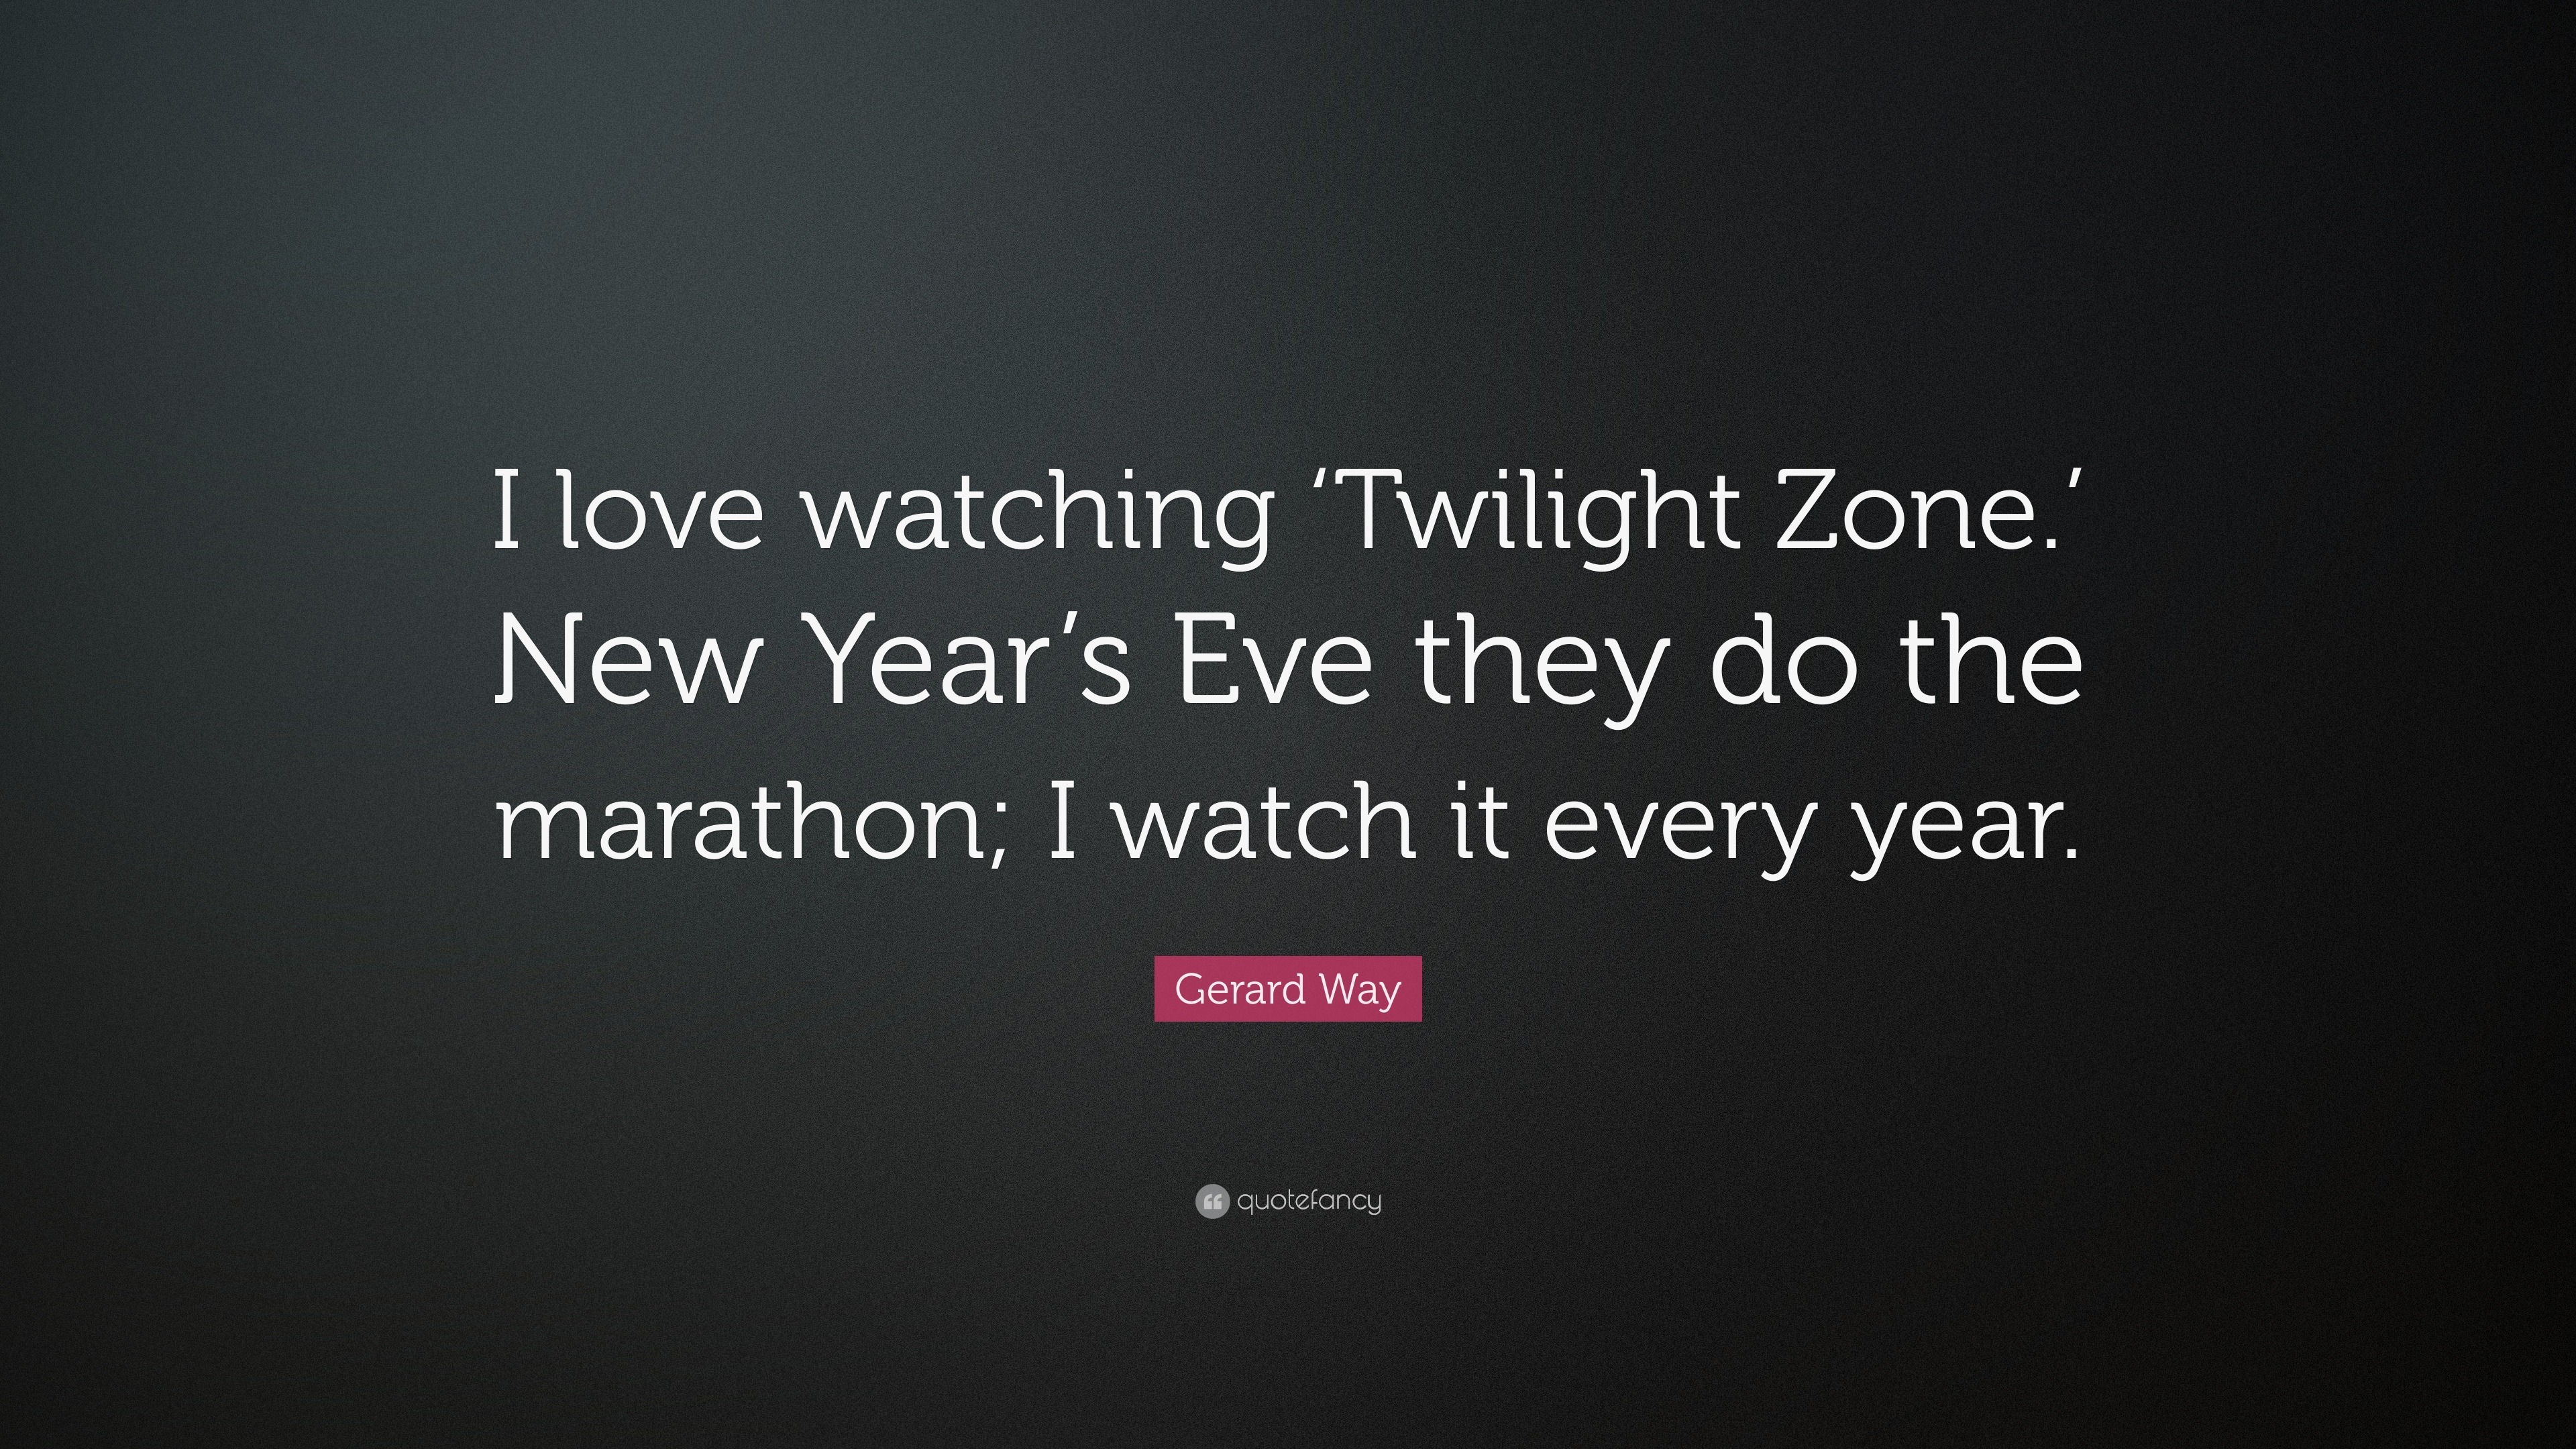 Gerard Way Quote “I love watching ‘Twilight Zone.’ New Year’s Eve they